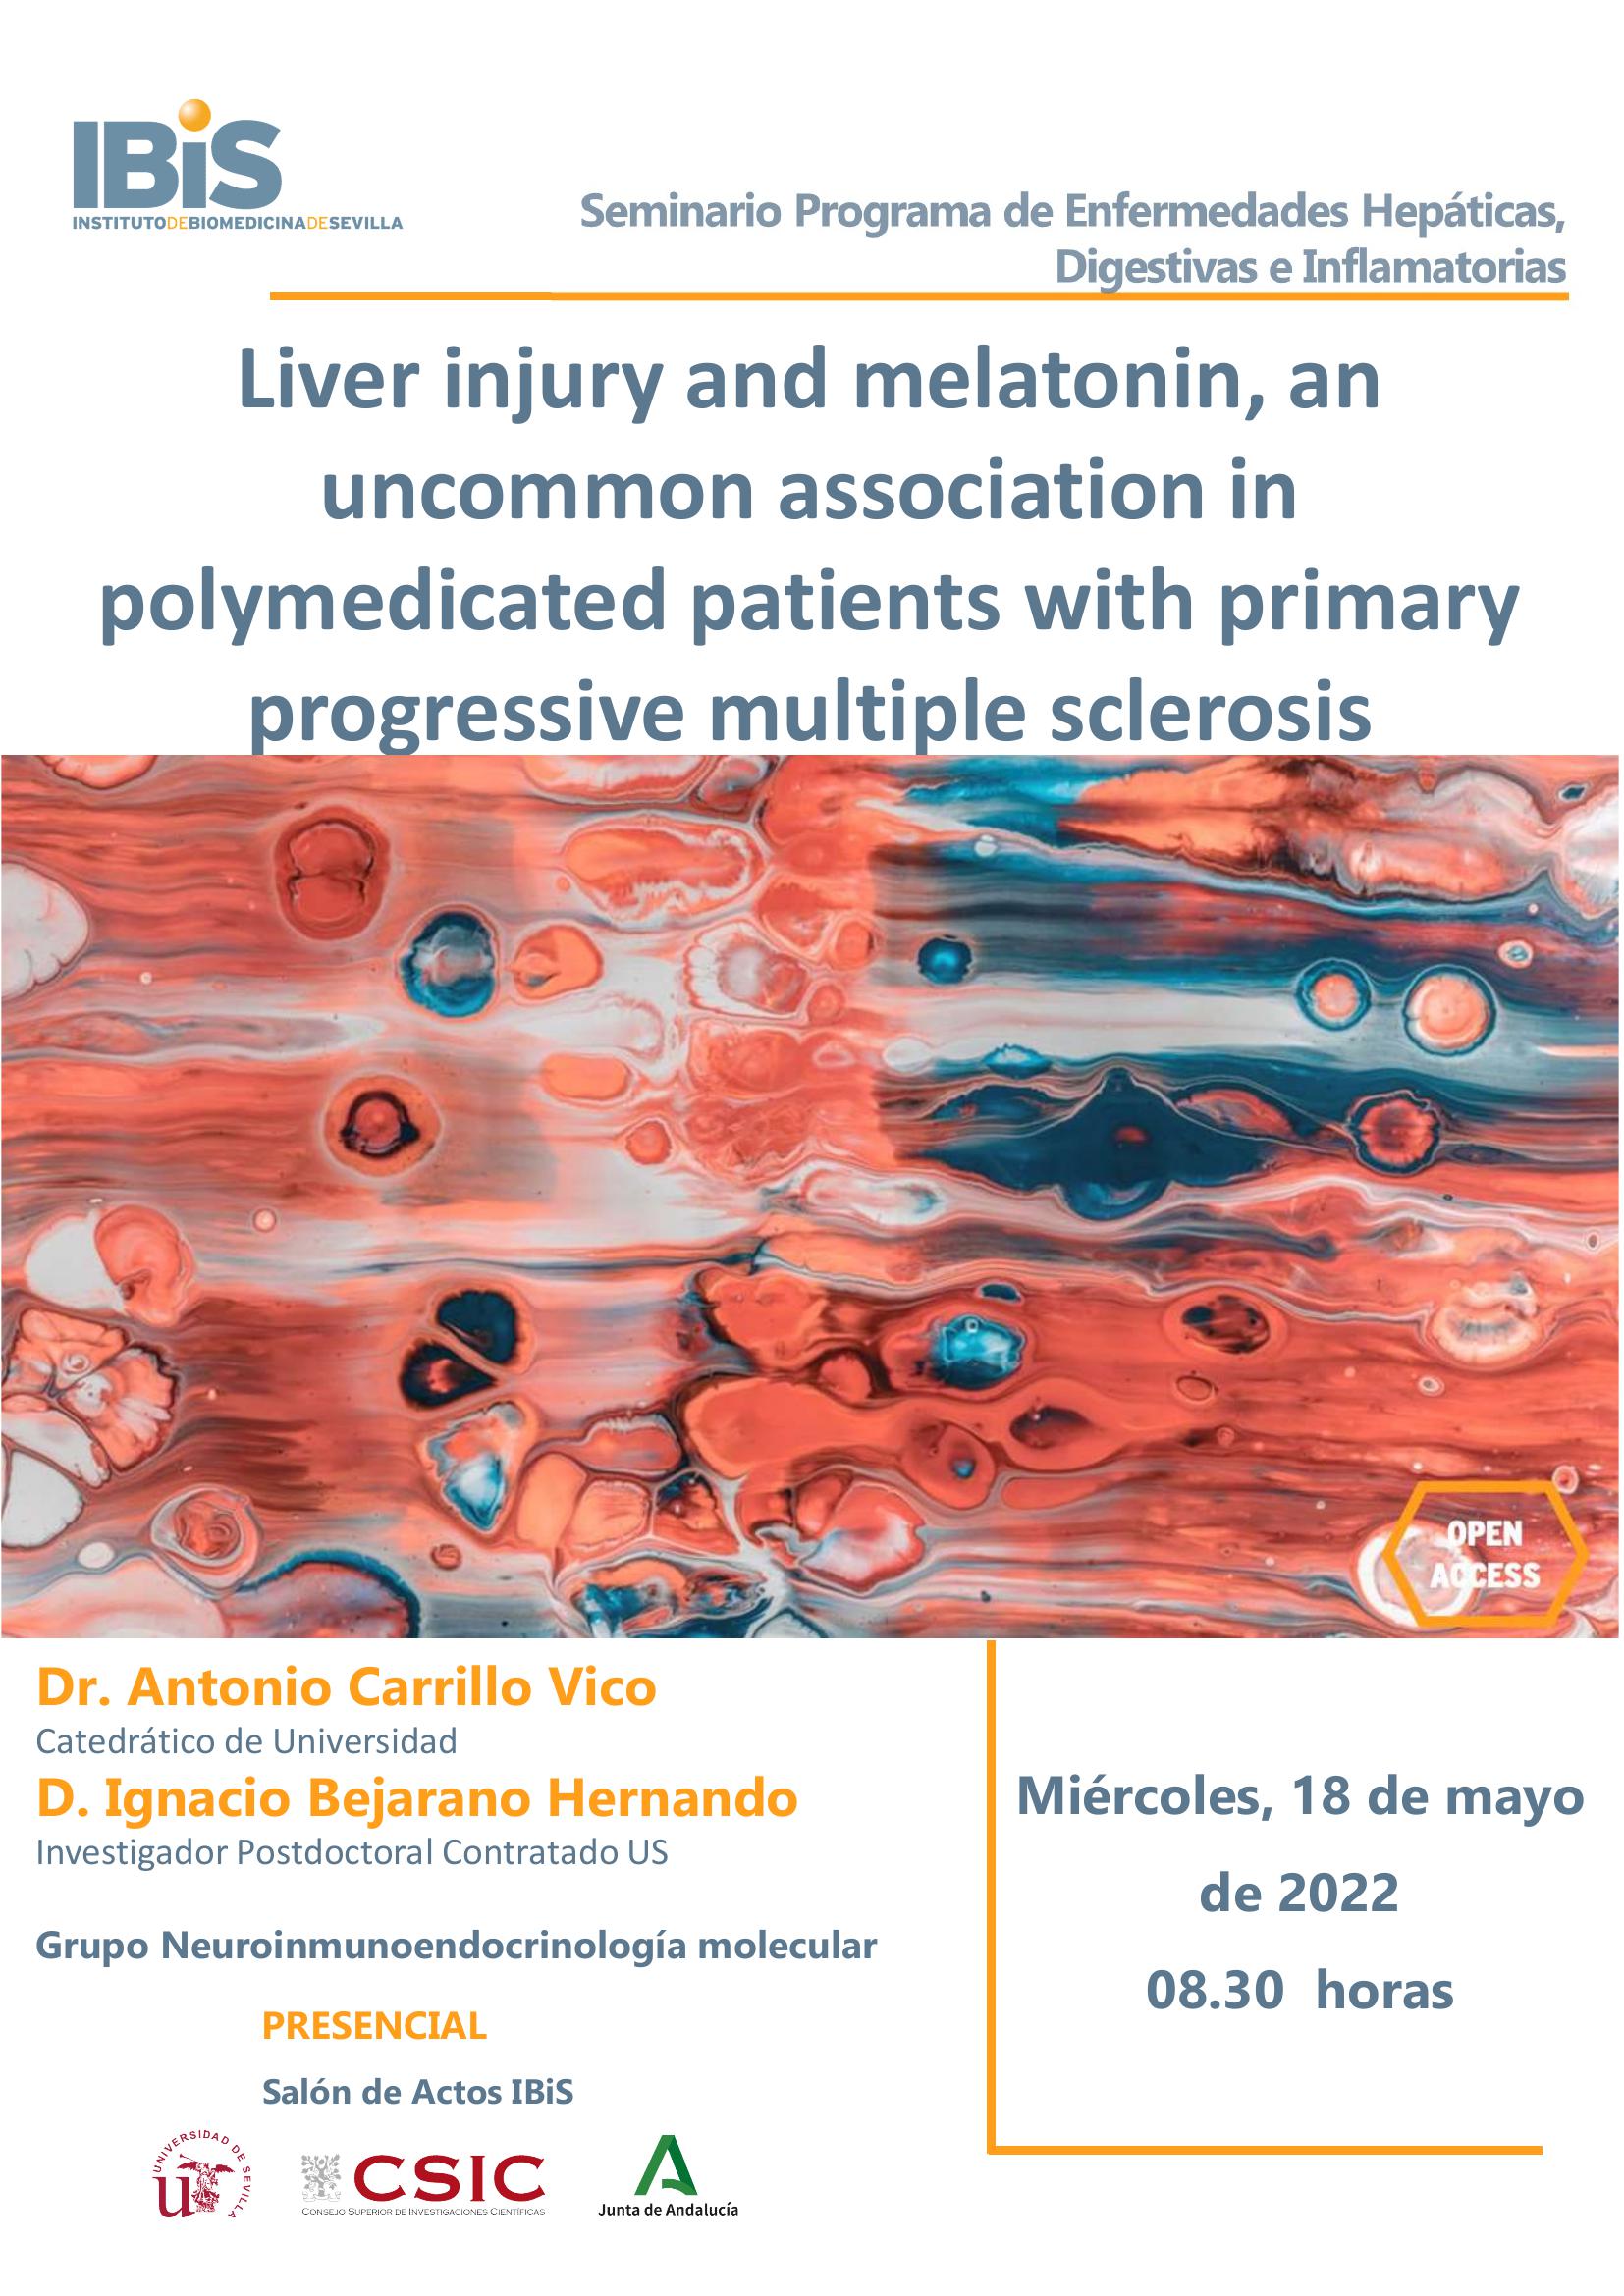 Poster: Liver injury and melatonin, an uncommon association in polymedicated patients with primary progressive multiple sclerosis